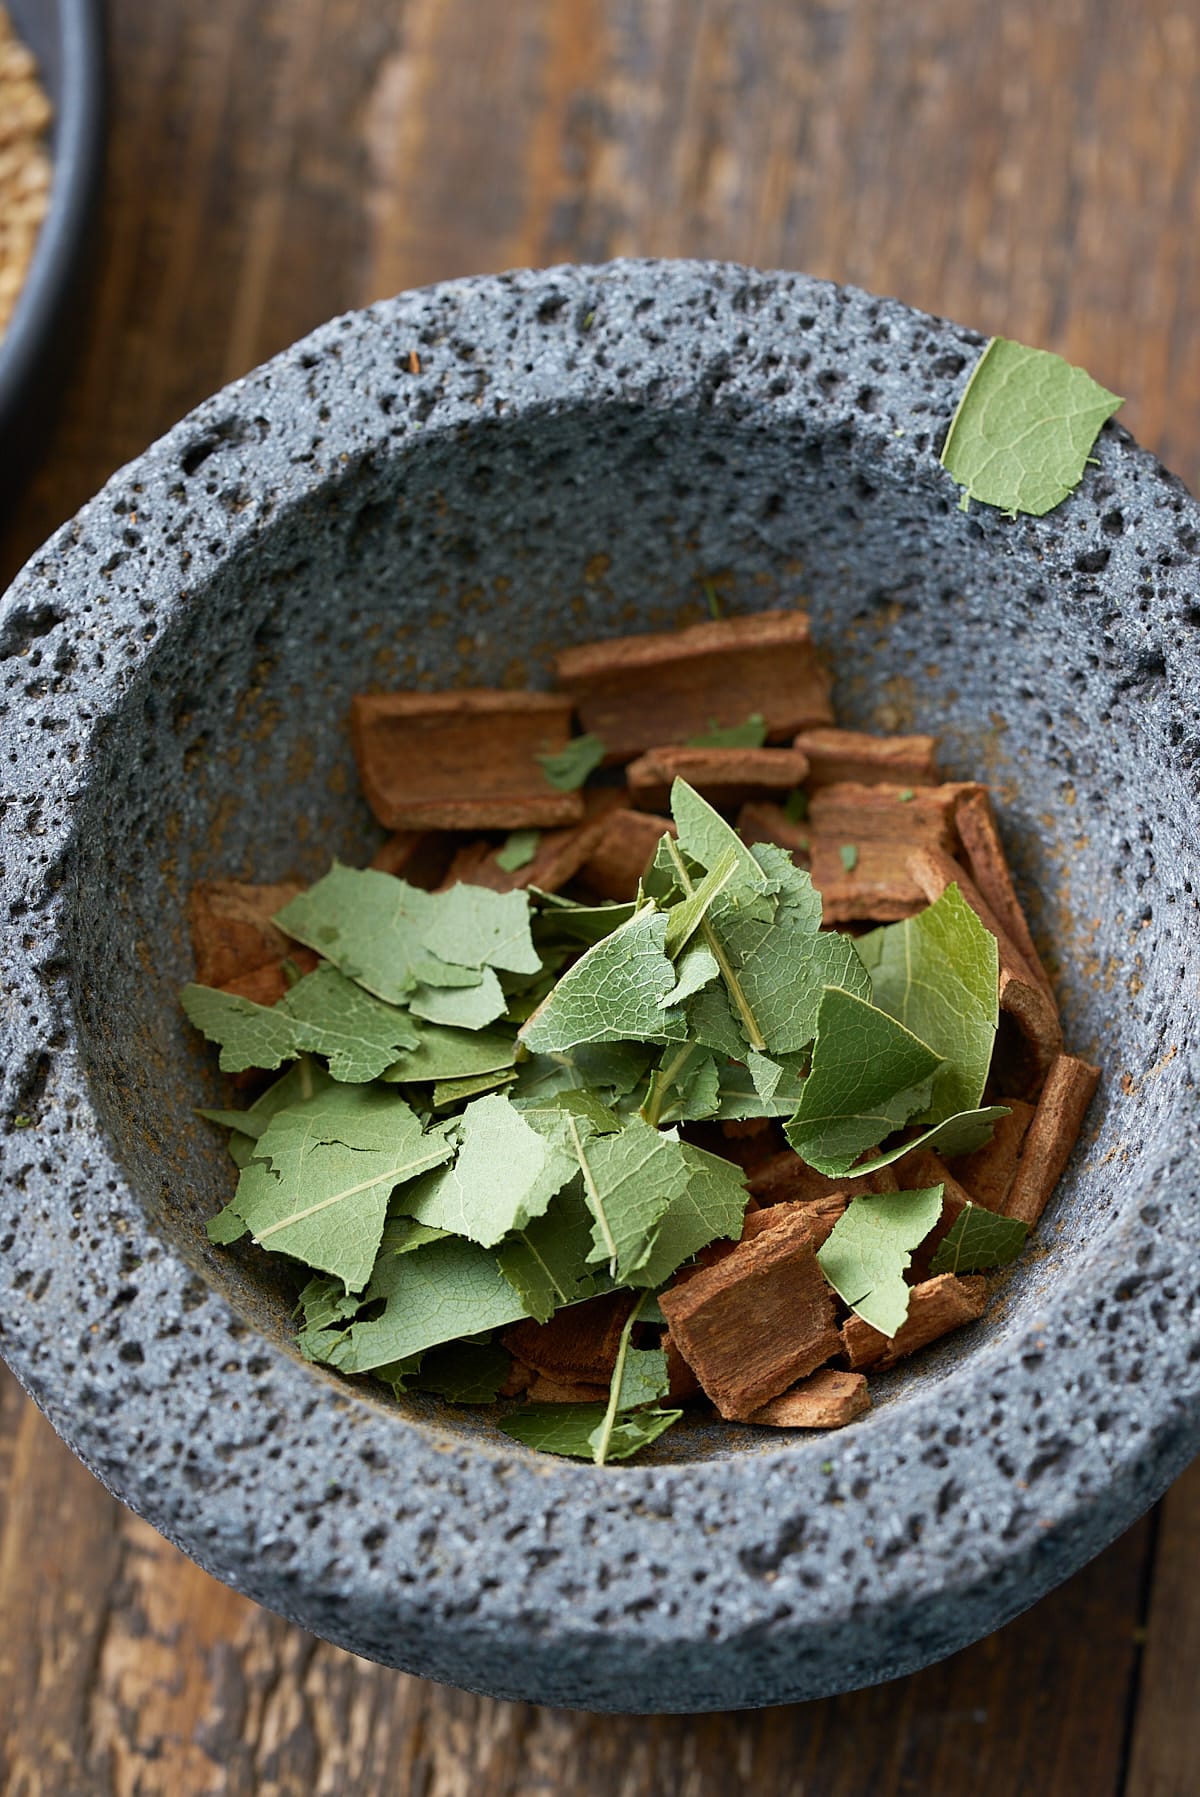 Pestle and mortar filled with whole spices, crushed cinnamon sticks and bay leaves, set on a wooden board.